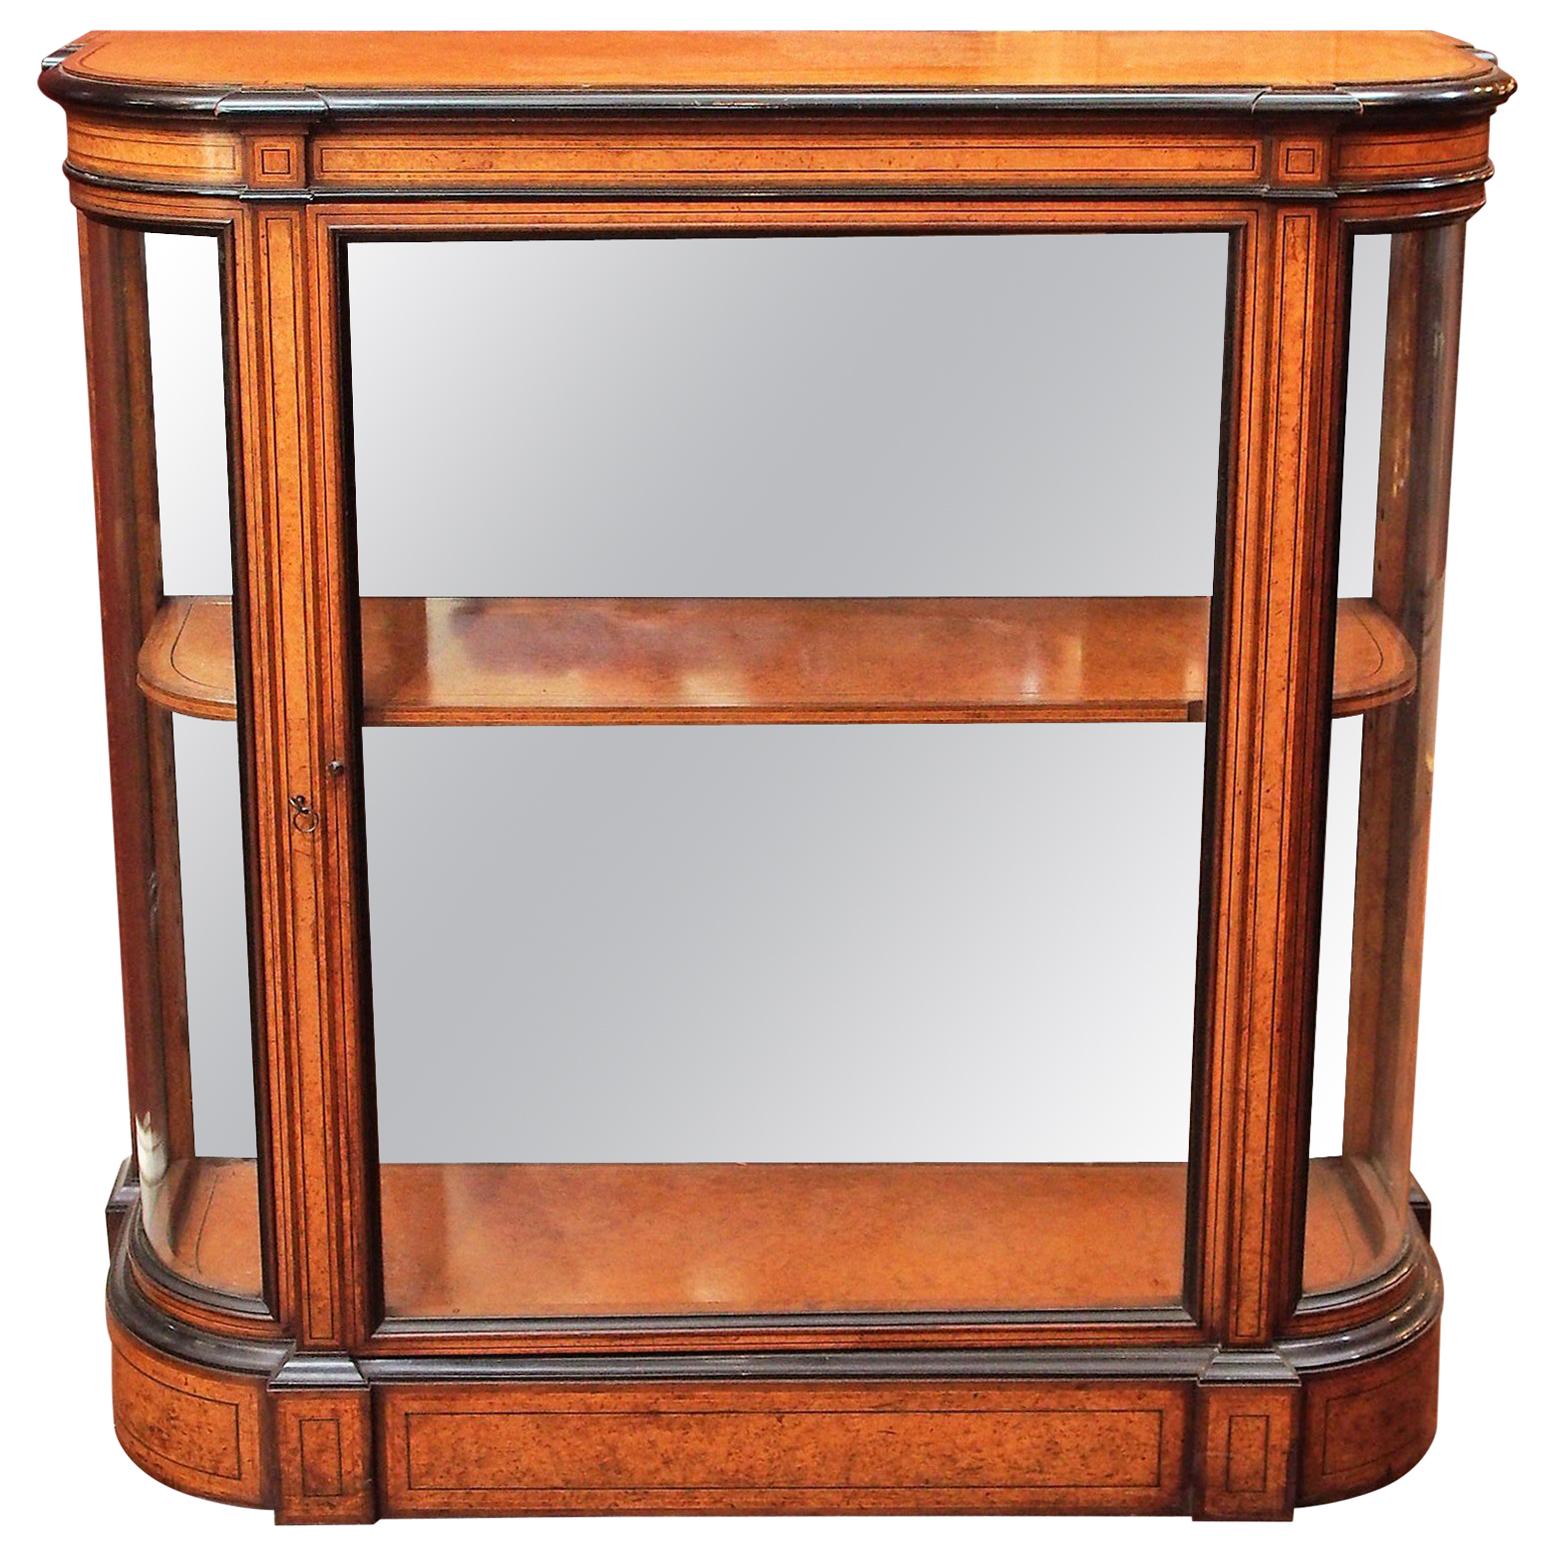 Antique English Amboyna Wood, Mirror and Curved Glass Credenza, circa 1880